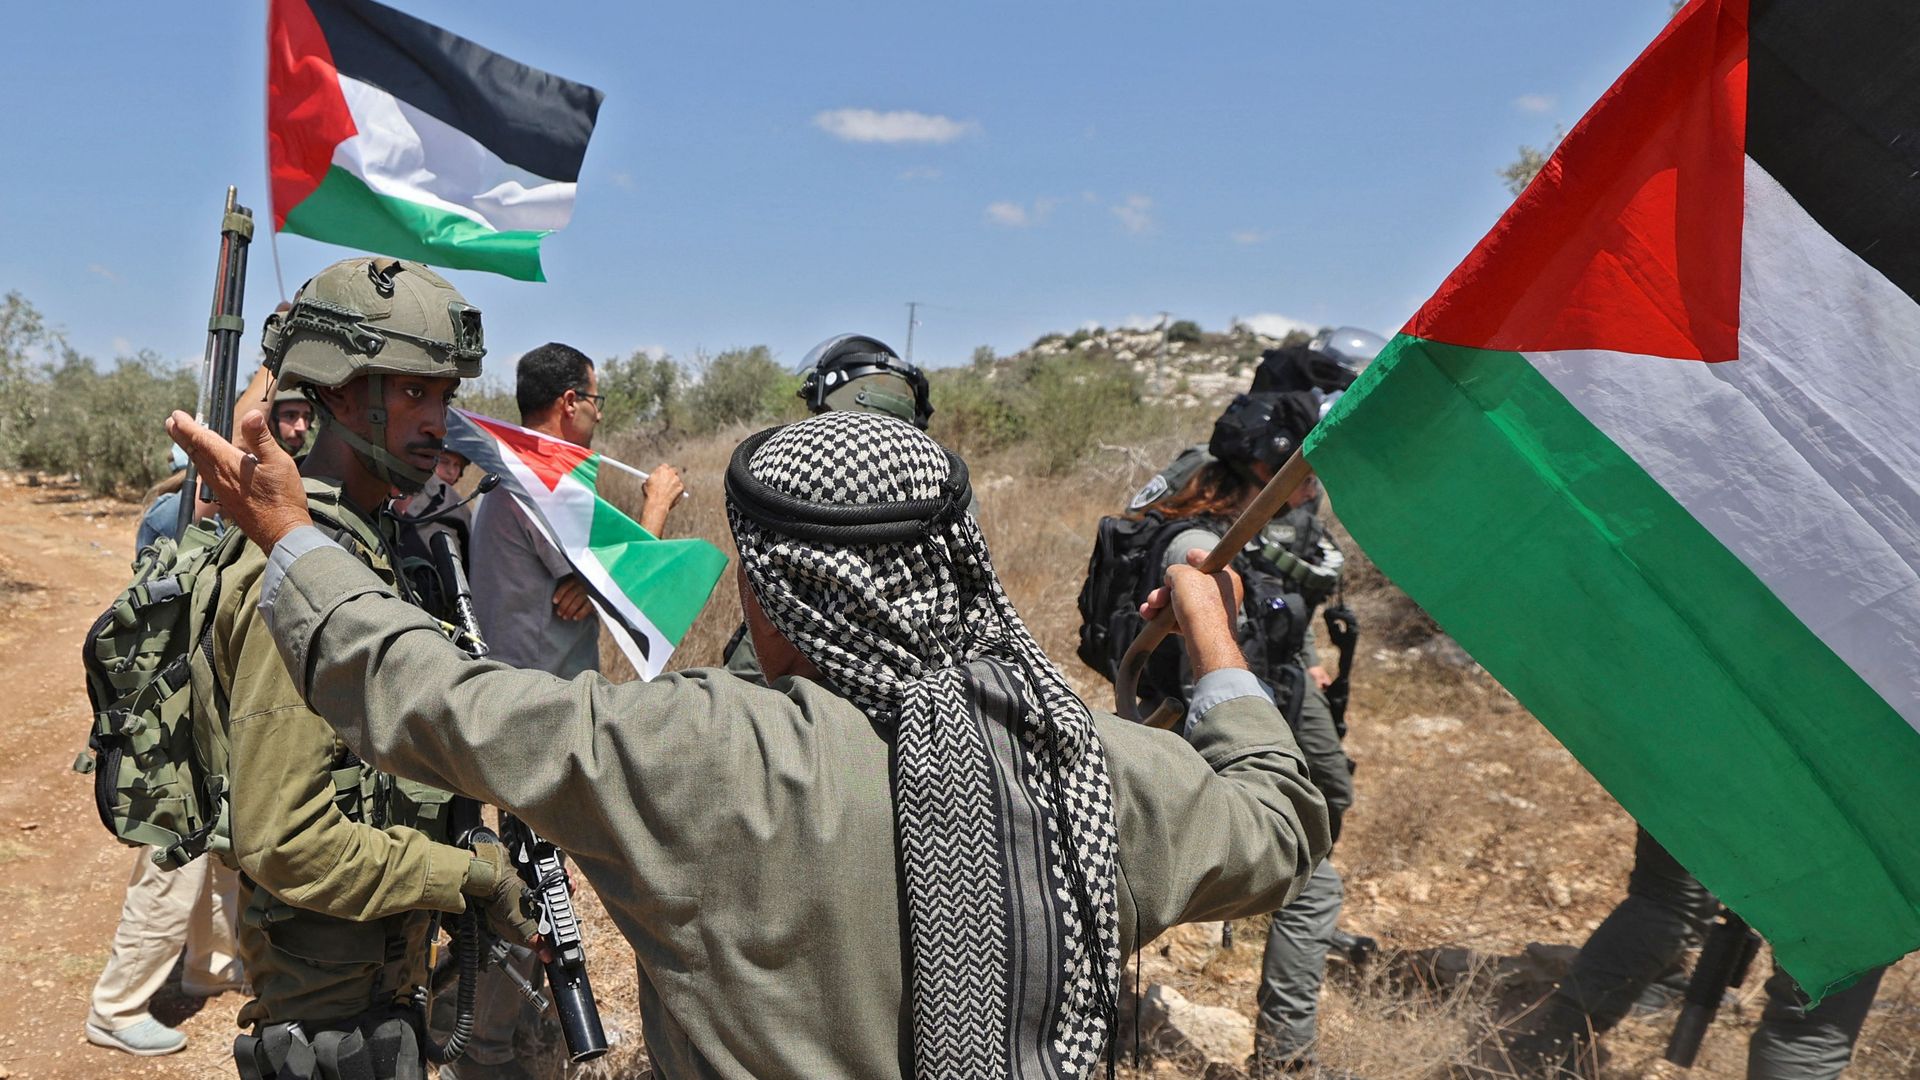 A protester waves Palestinian flags in front of Israeli soldiers in the village of Beit Lid in the occupied West Bank on Aug. 26. Photo: 